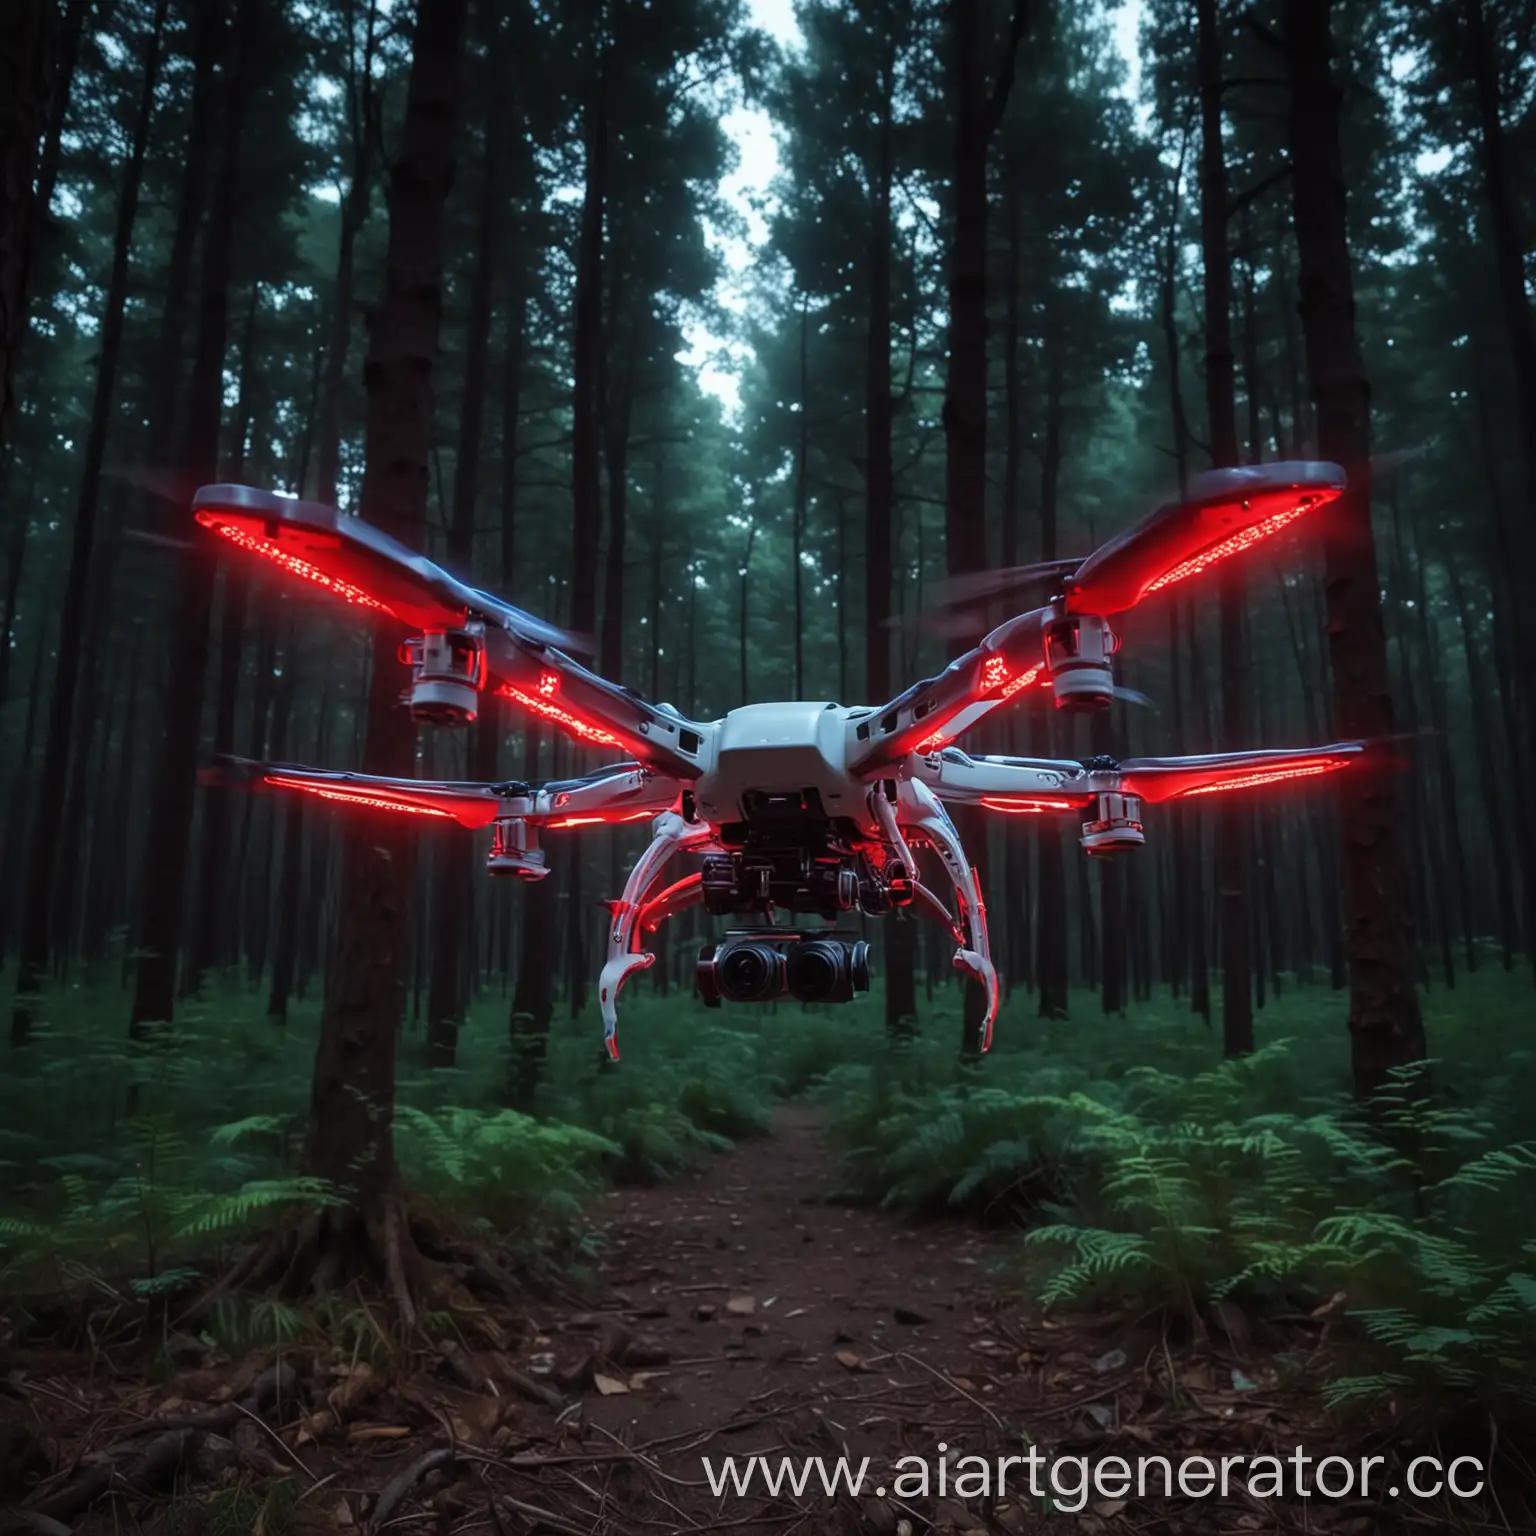 NeonTailed-FPV-Drone-Flying-Through-Night-Forest